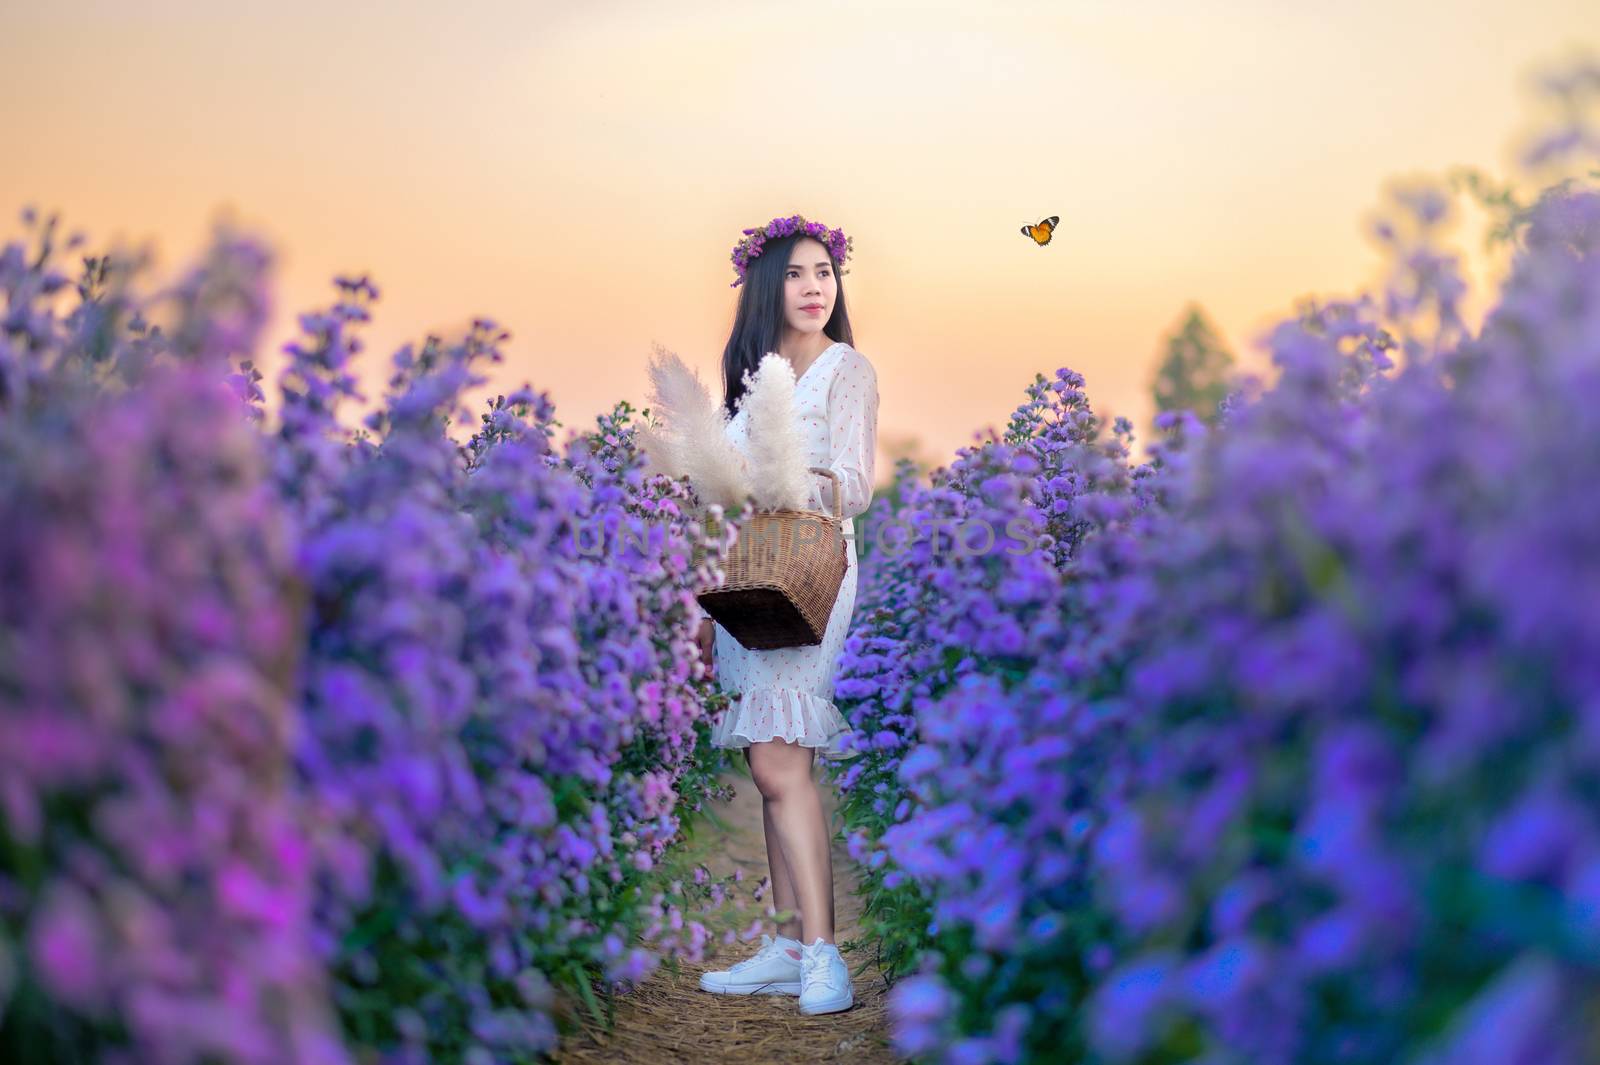 A woman watching flowers in a flower field with butterflies in the evening, orange light. by sarayut_thaneerat